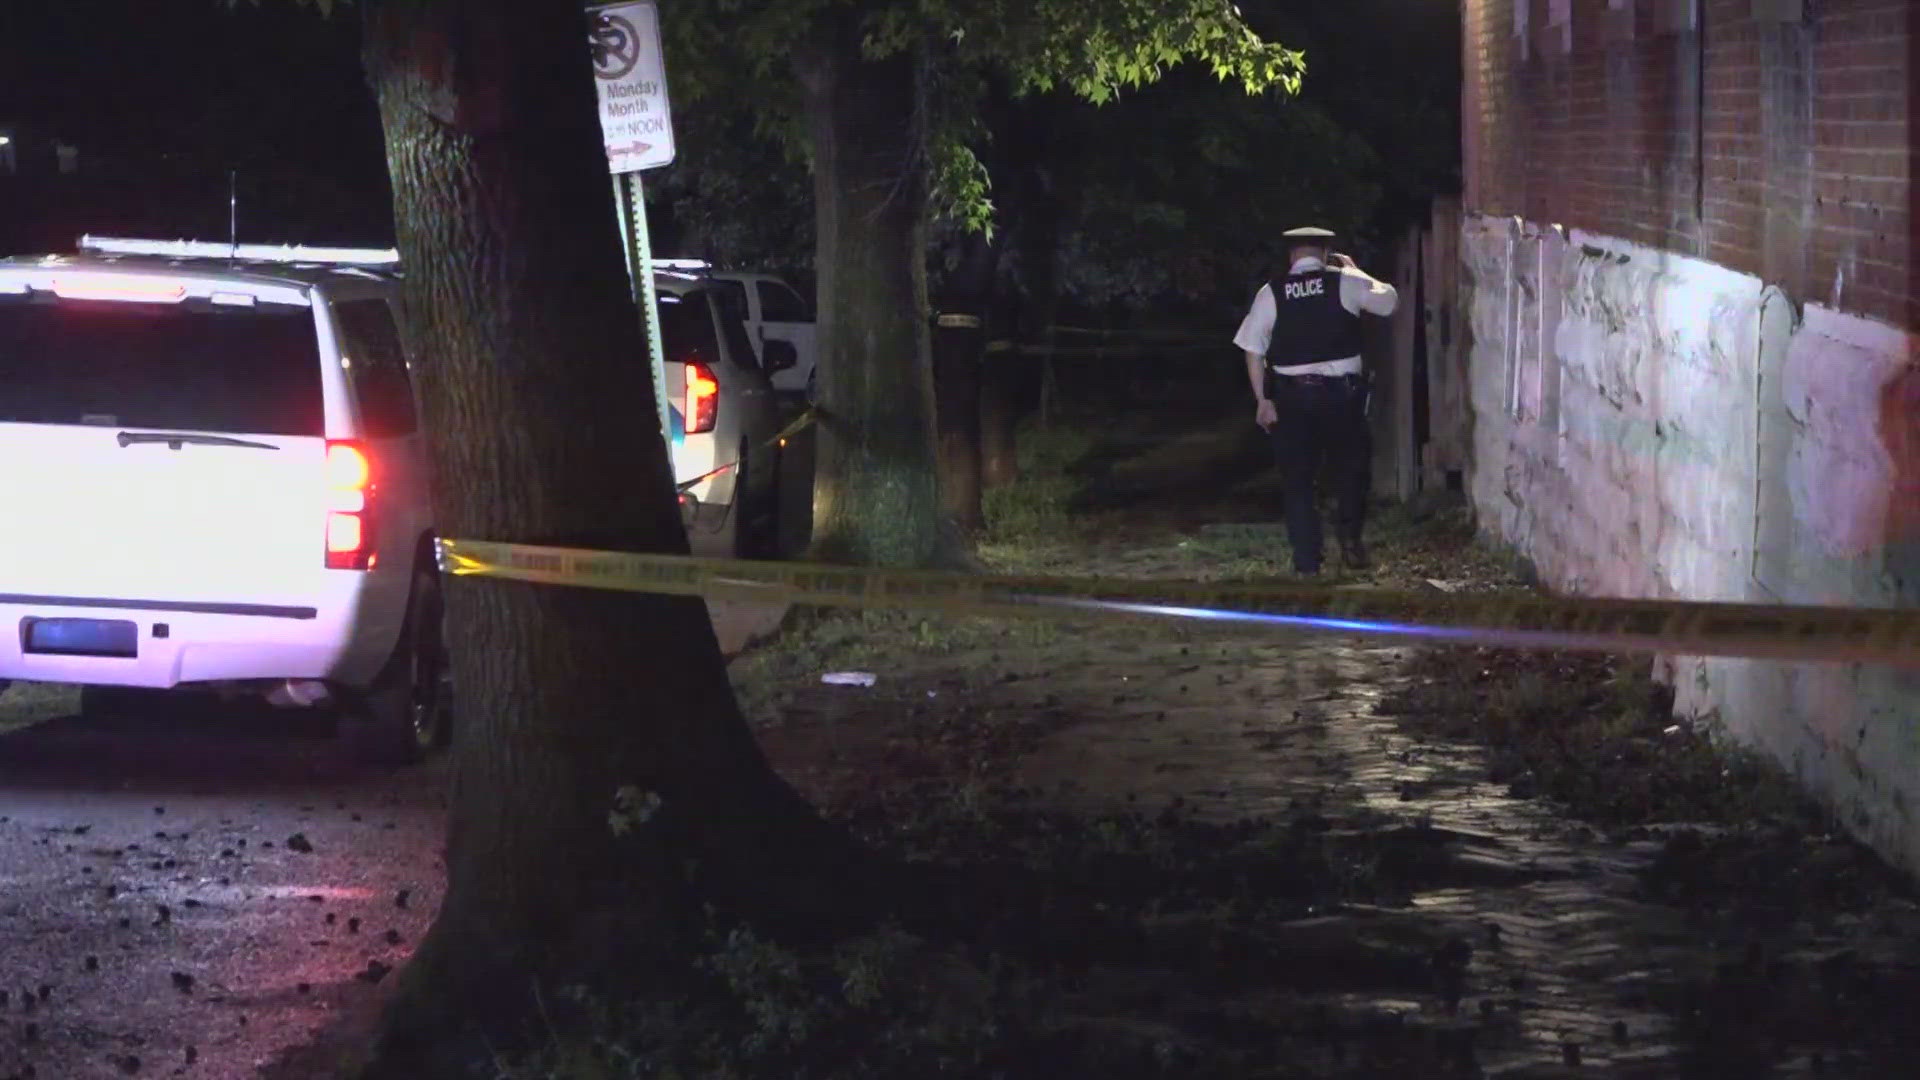 A shooting late Tuesday night in south St. Louis left a teenage girl dead. Police identified her as 15-year-old Dornae Hayes